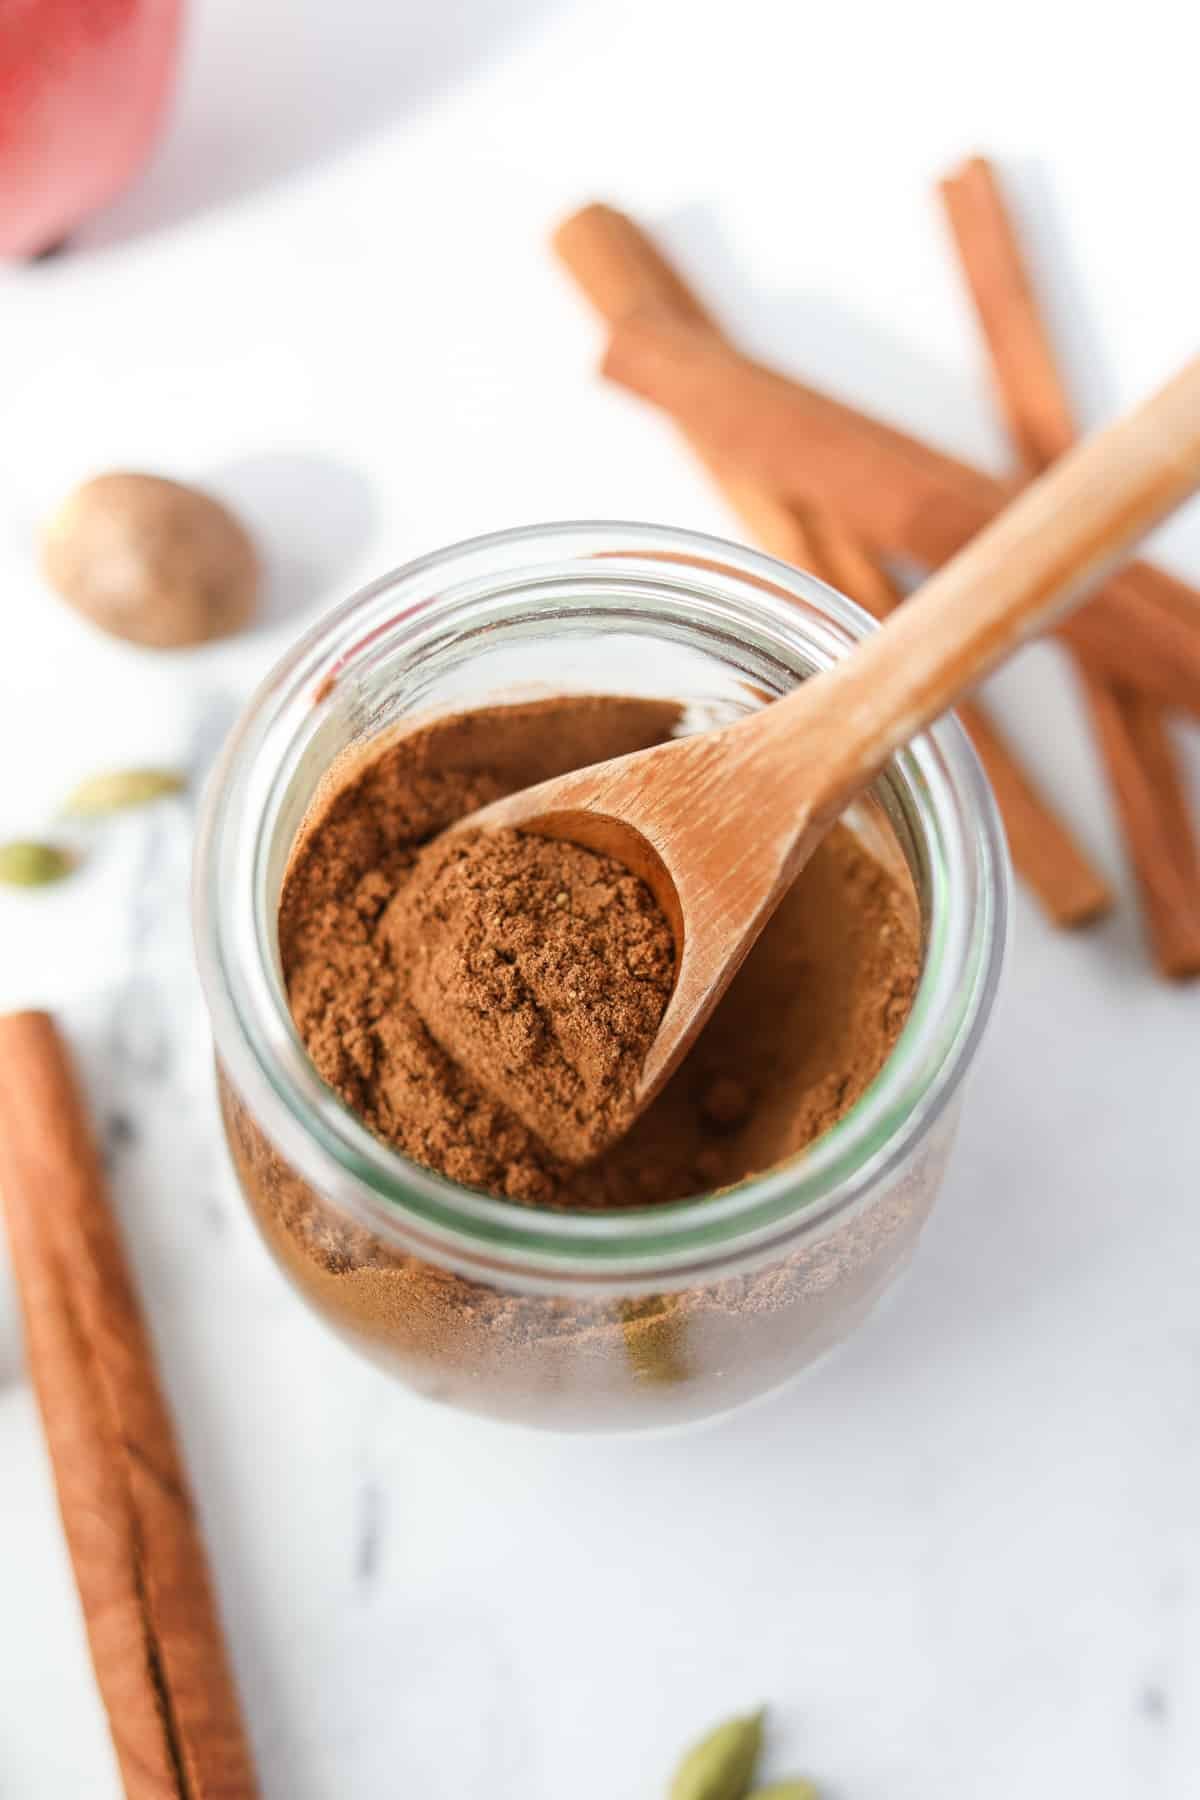 A small spoon taking a portion of apple spice from a jar.